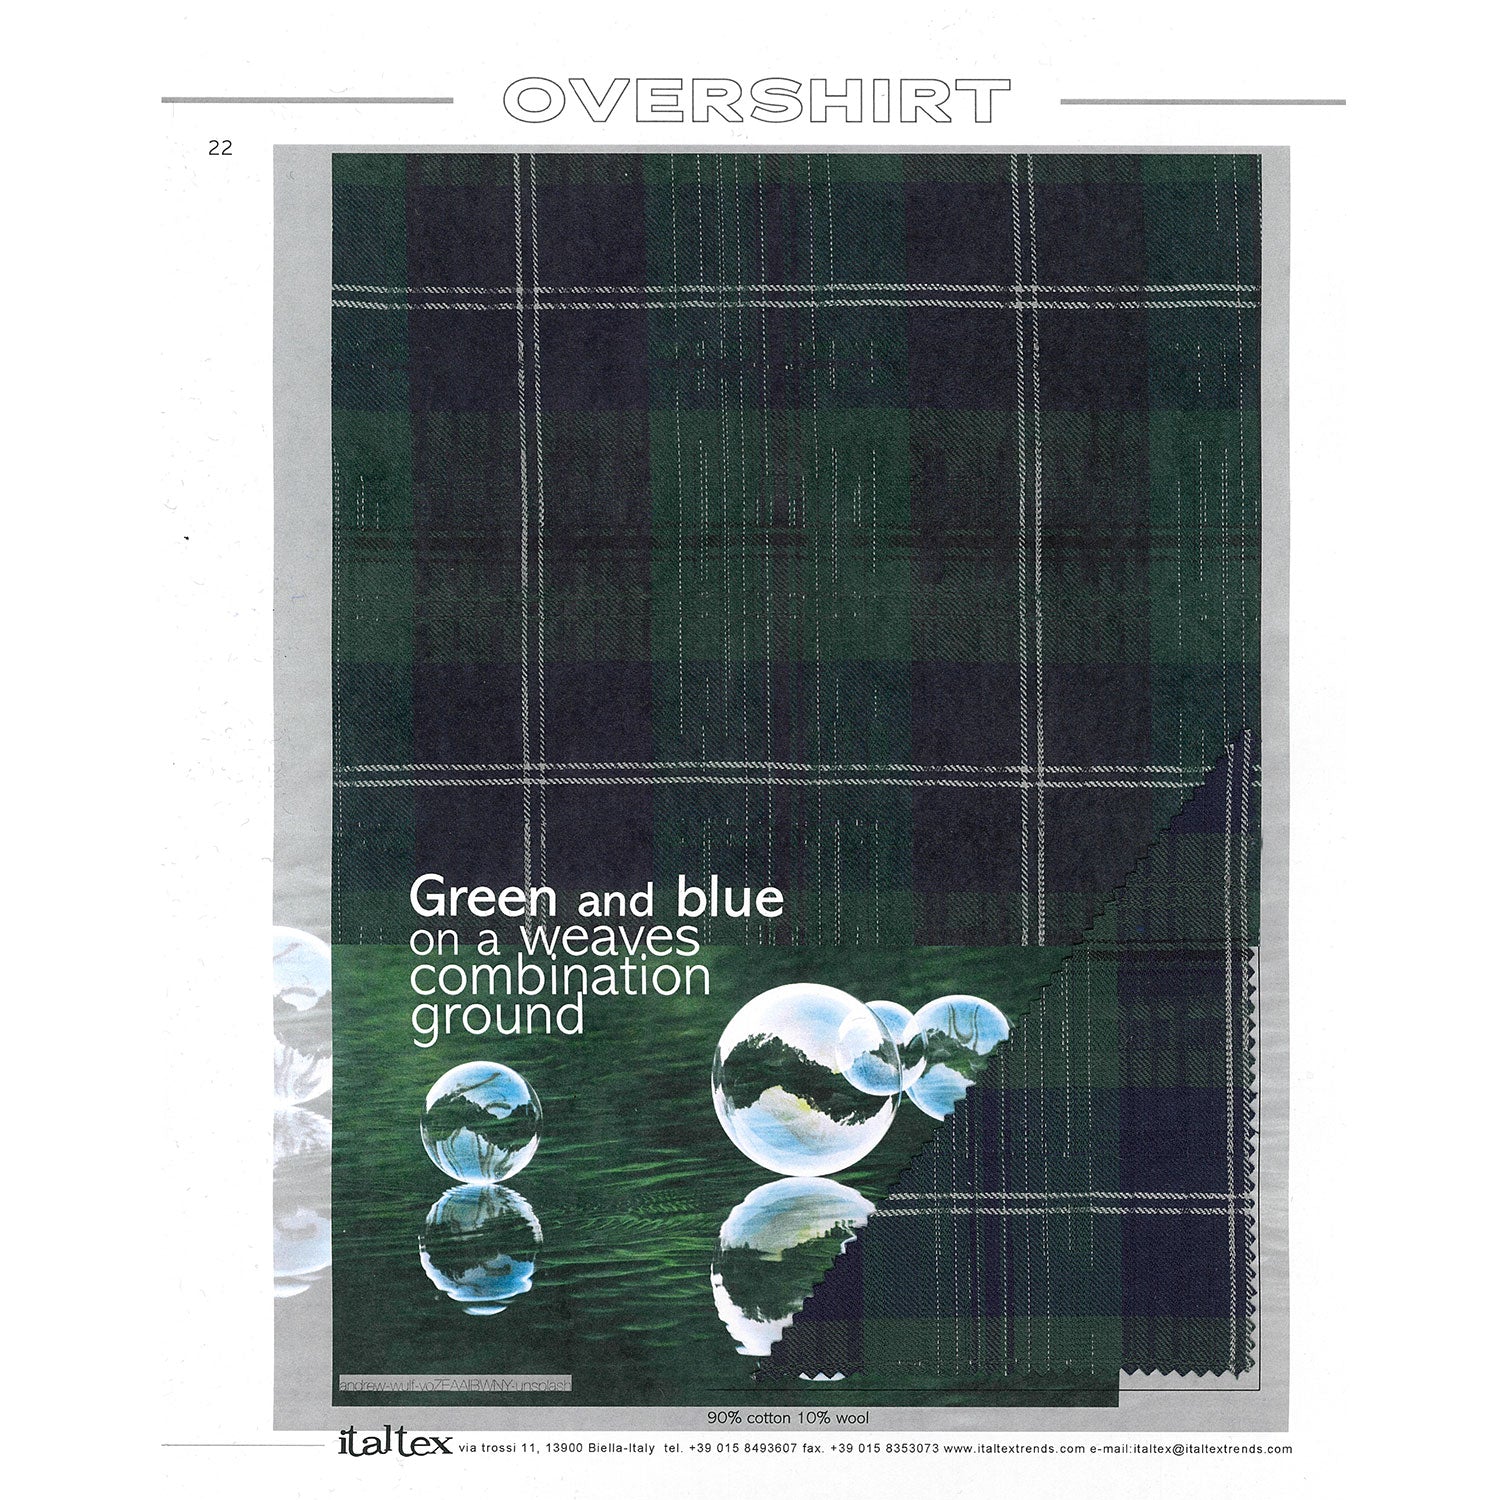 A green and blue plaid for overshirts with slub effects due to the weave, and weave combination from the Italtex fabric trend book OvA green and blue plaid for overshirts with slub effects due to the weave, and weave combination from the Italtex fabric trend book Overshirts Winter 2025ershirts Winter 2025